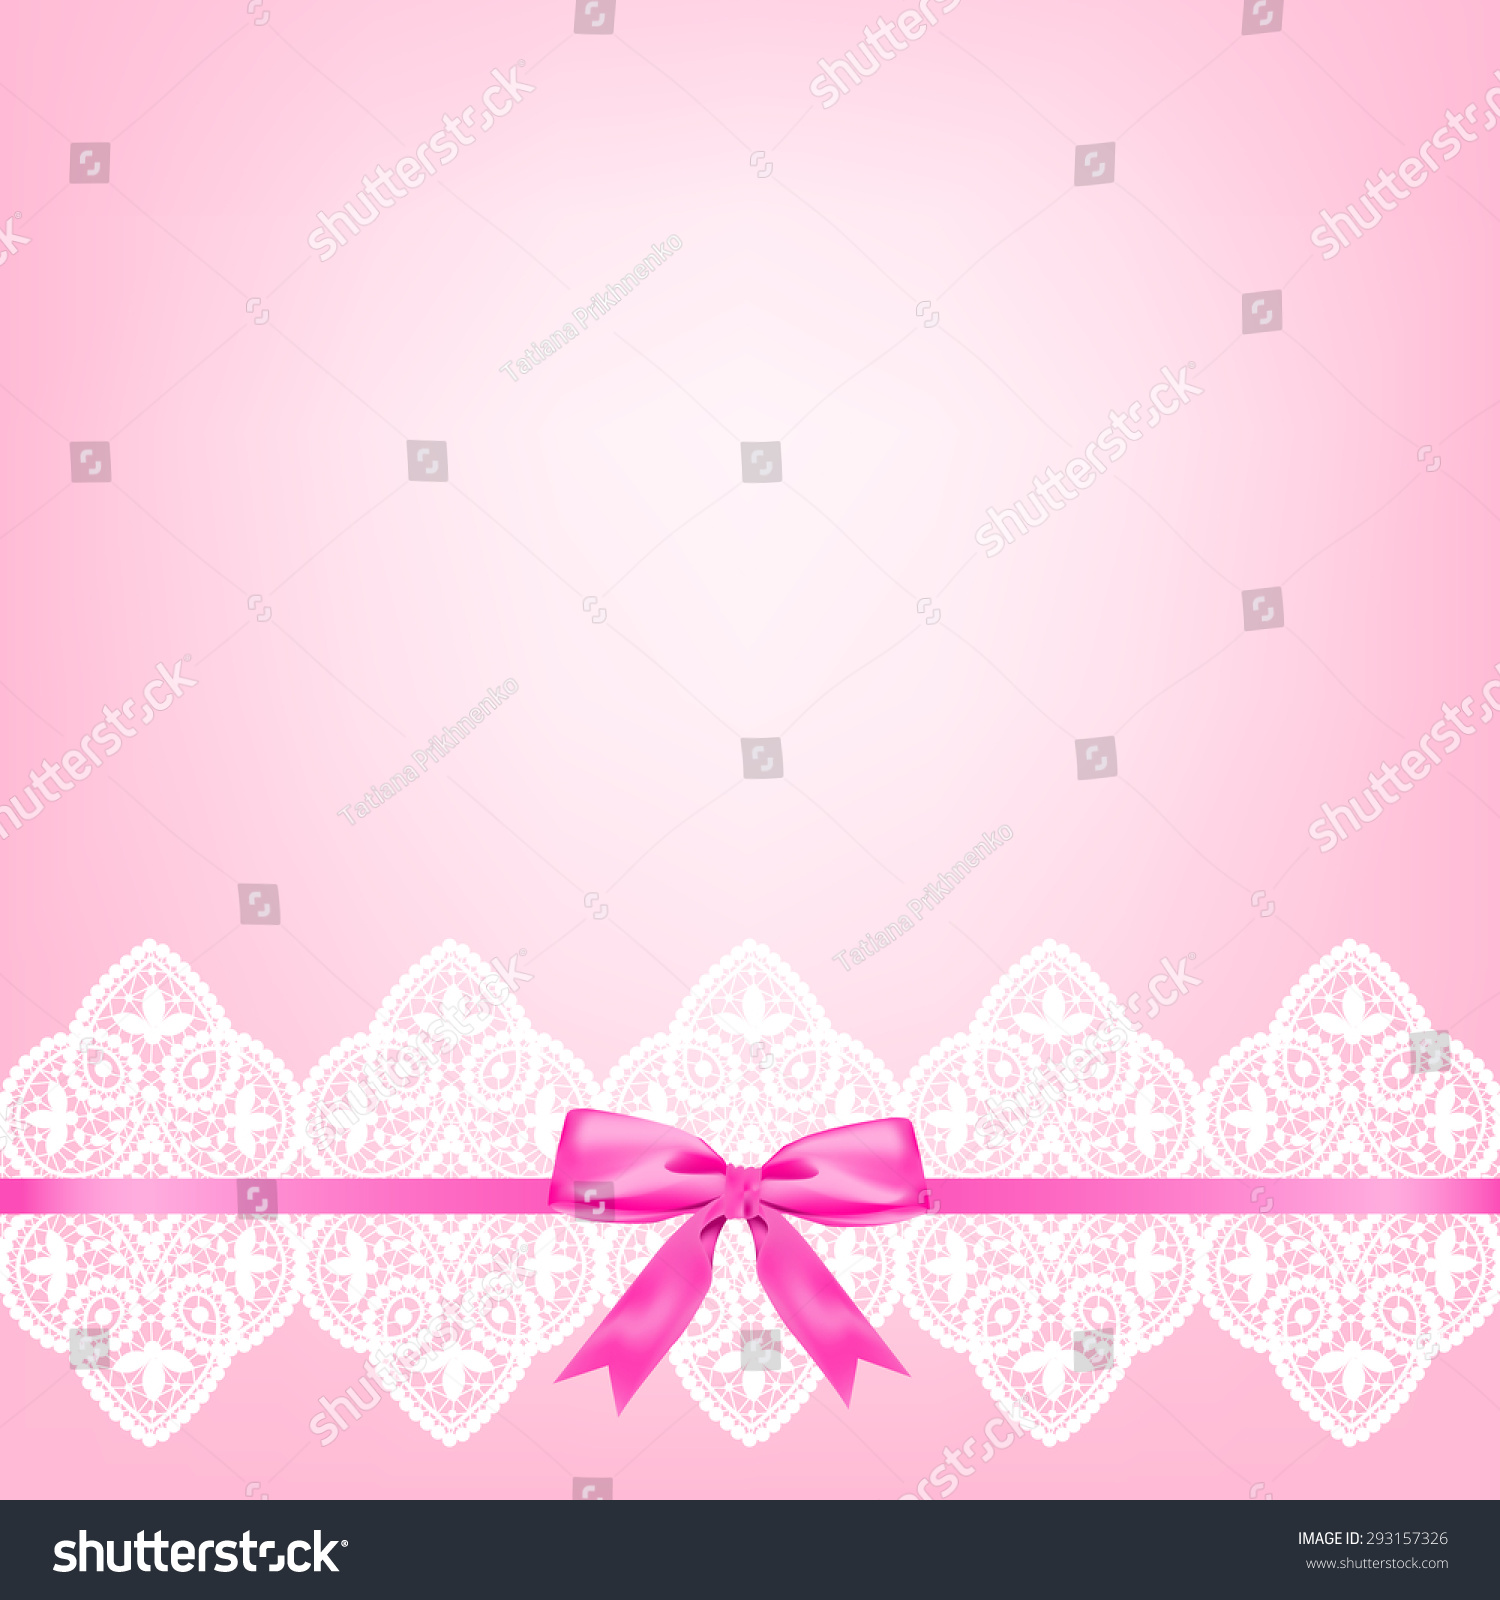 White Lace Border With A Bow On A Pink Background Stock Vector ...